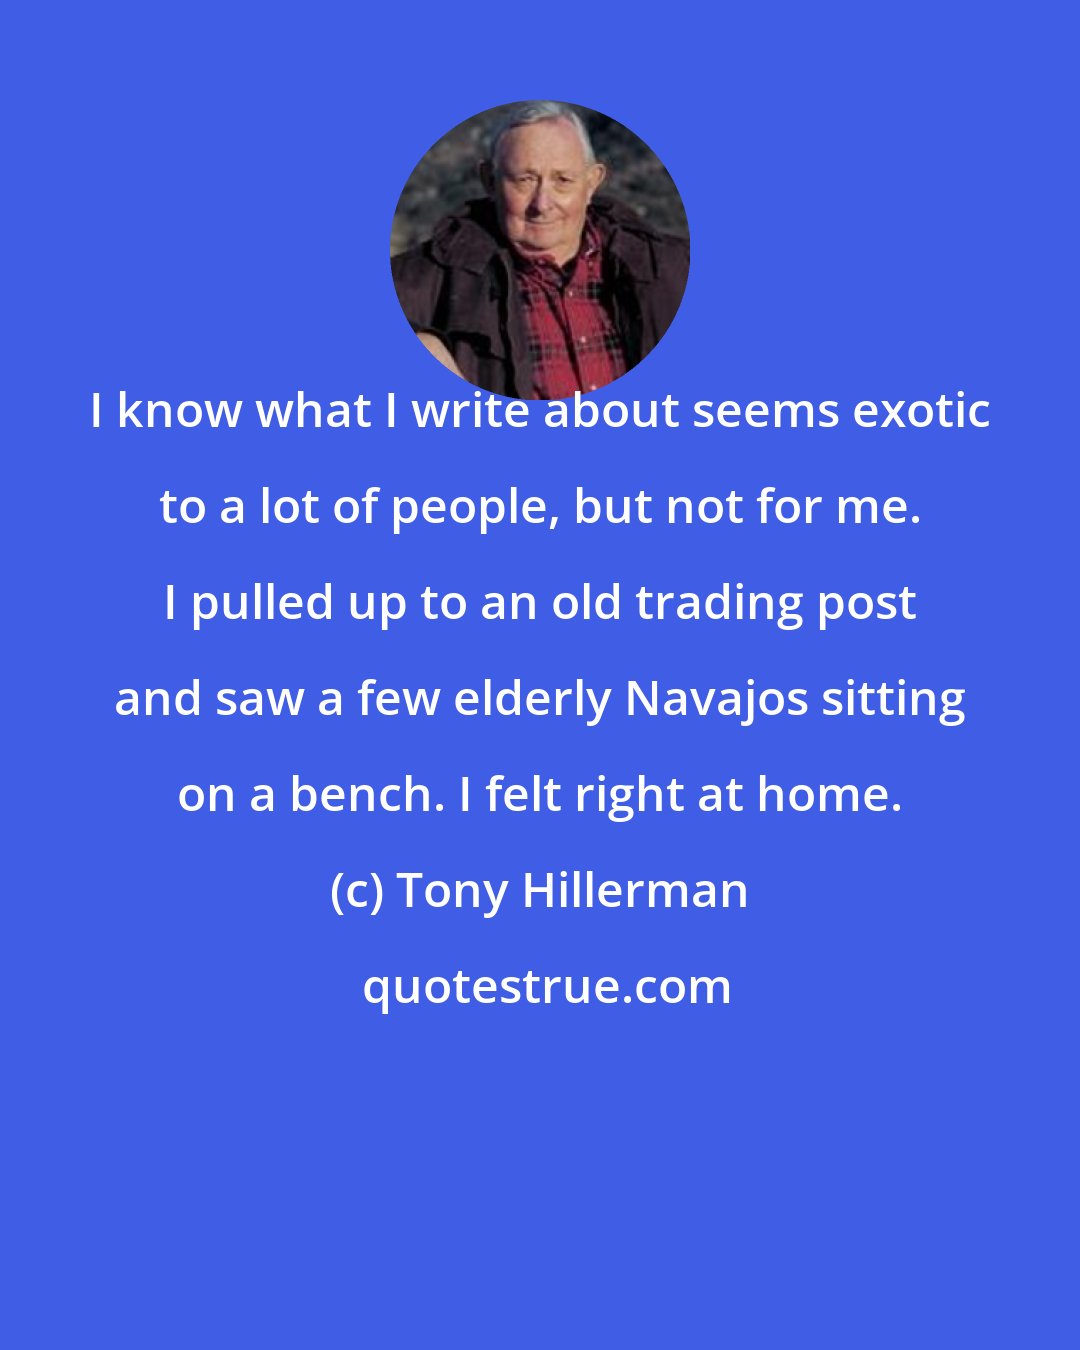 Tony Hillerman: I know what I write about seems exotic to a lot of people, but not for me. I pulled up to an old trading post and saw a few elderly Navajos sitting on a bench. I felt right at home.